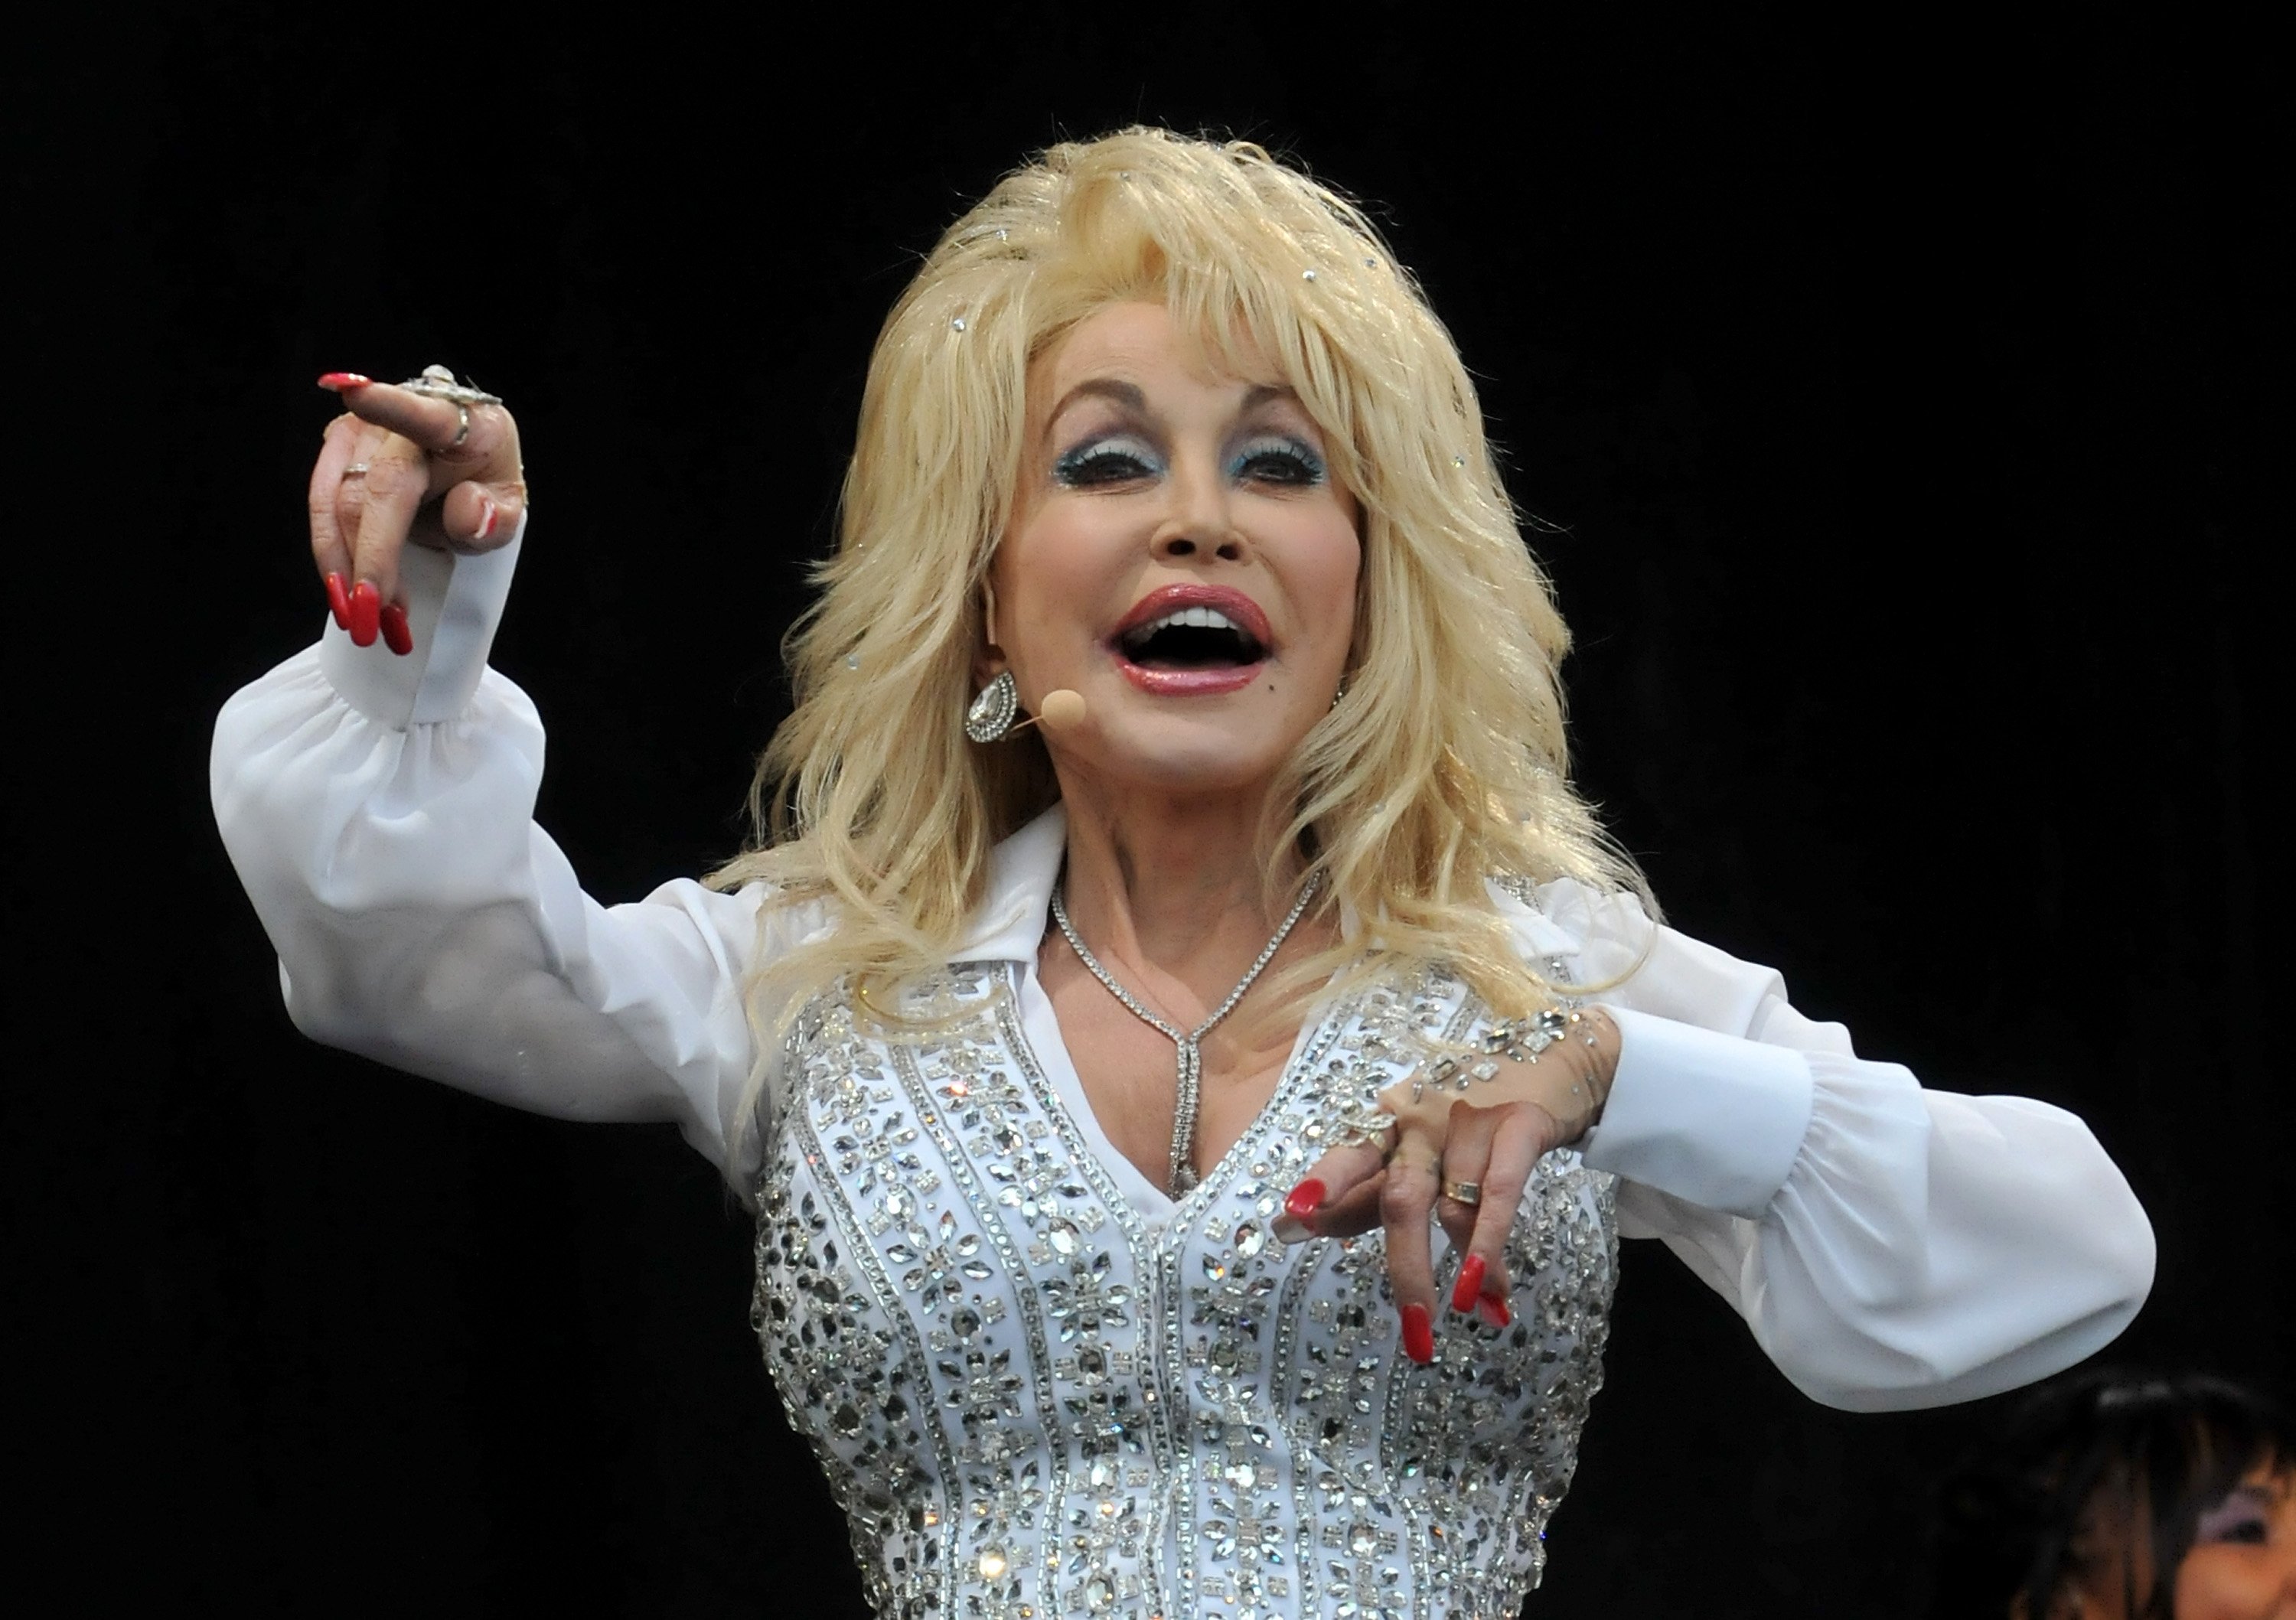 Dolly Parton performs on the Pyramid stage during day three of the Glastonbury Festival. She's singing and in an all-white outfit.